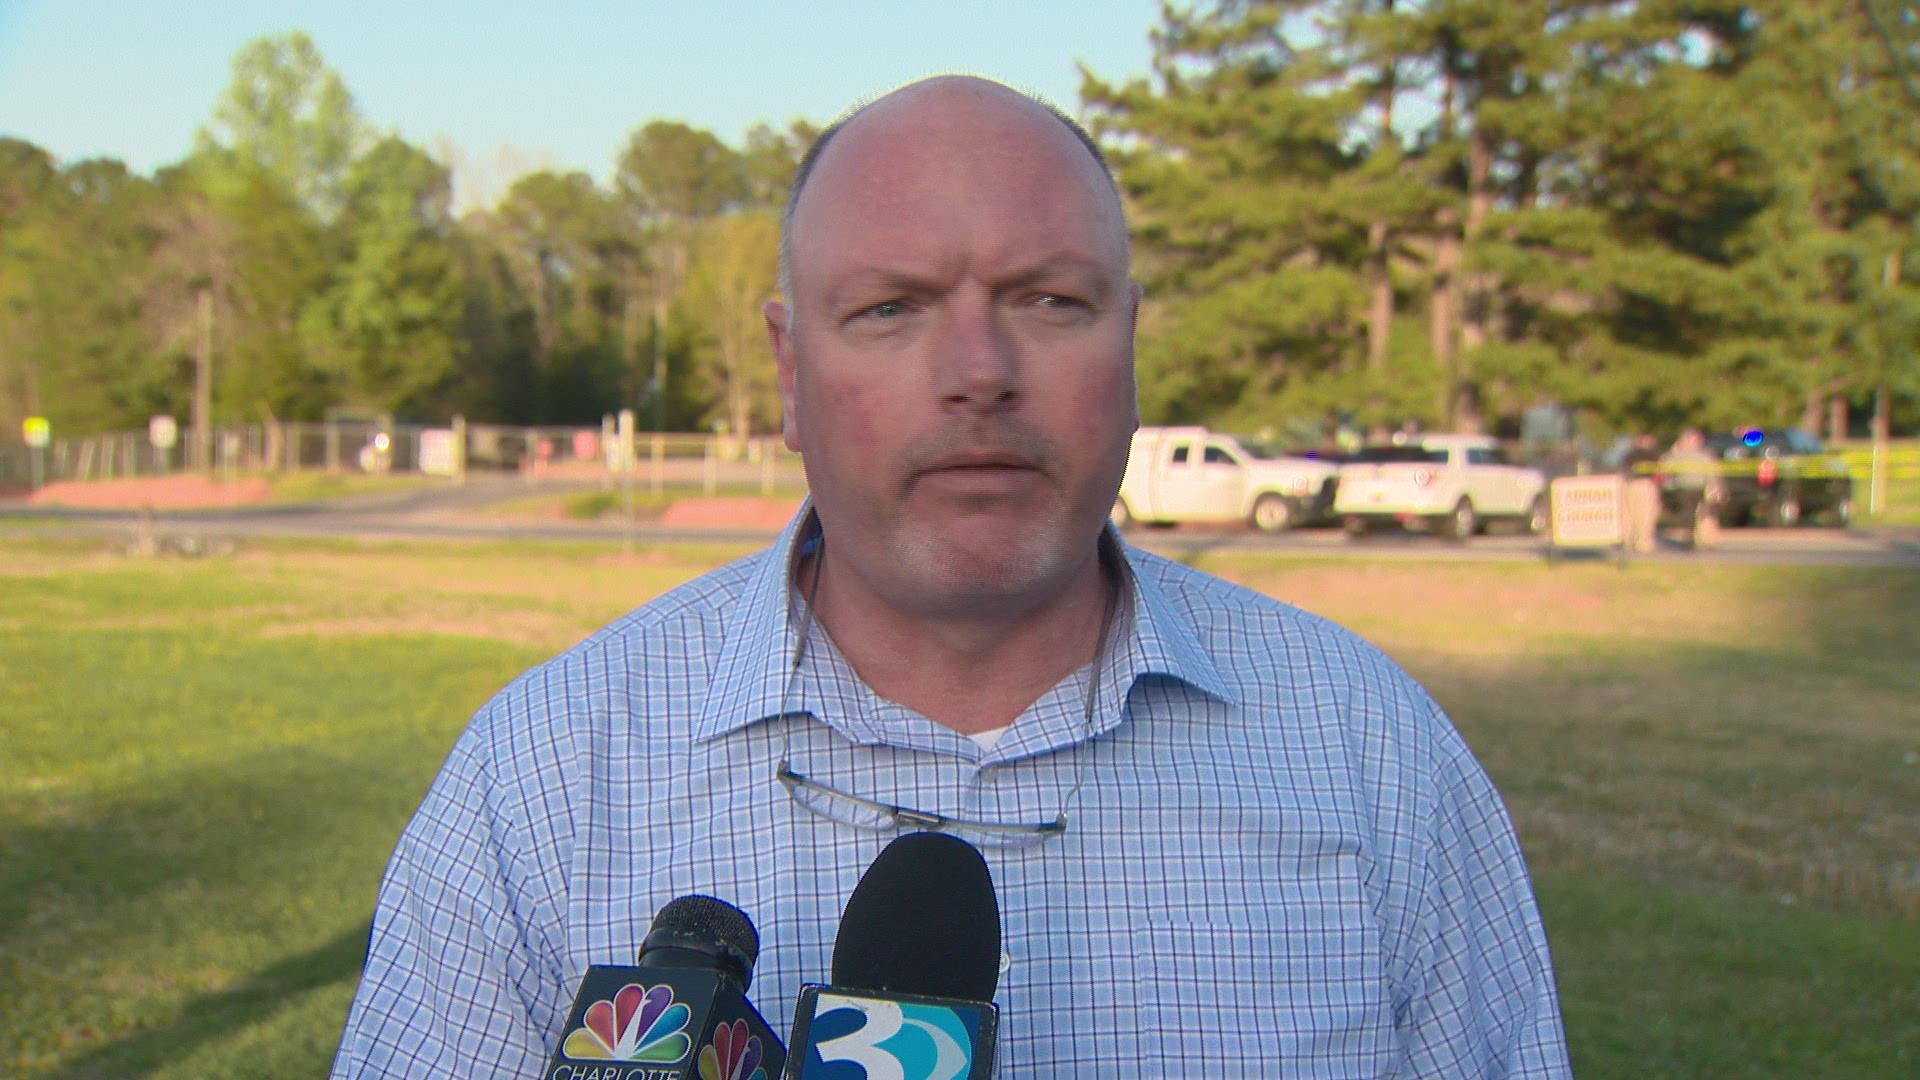 Sheriff gives update on deadly shooting in York County